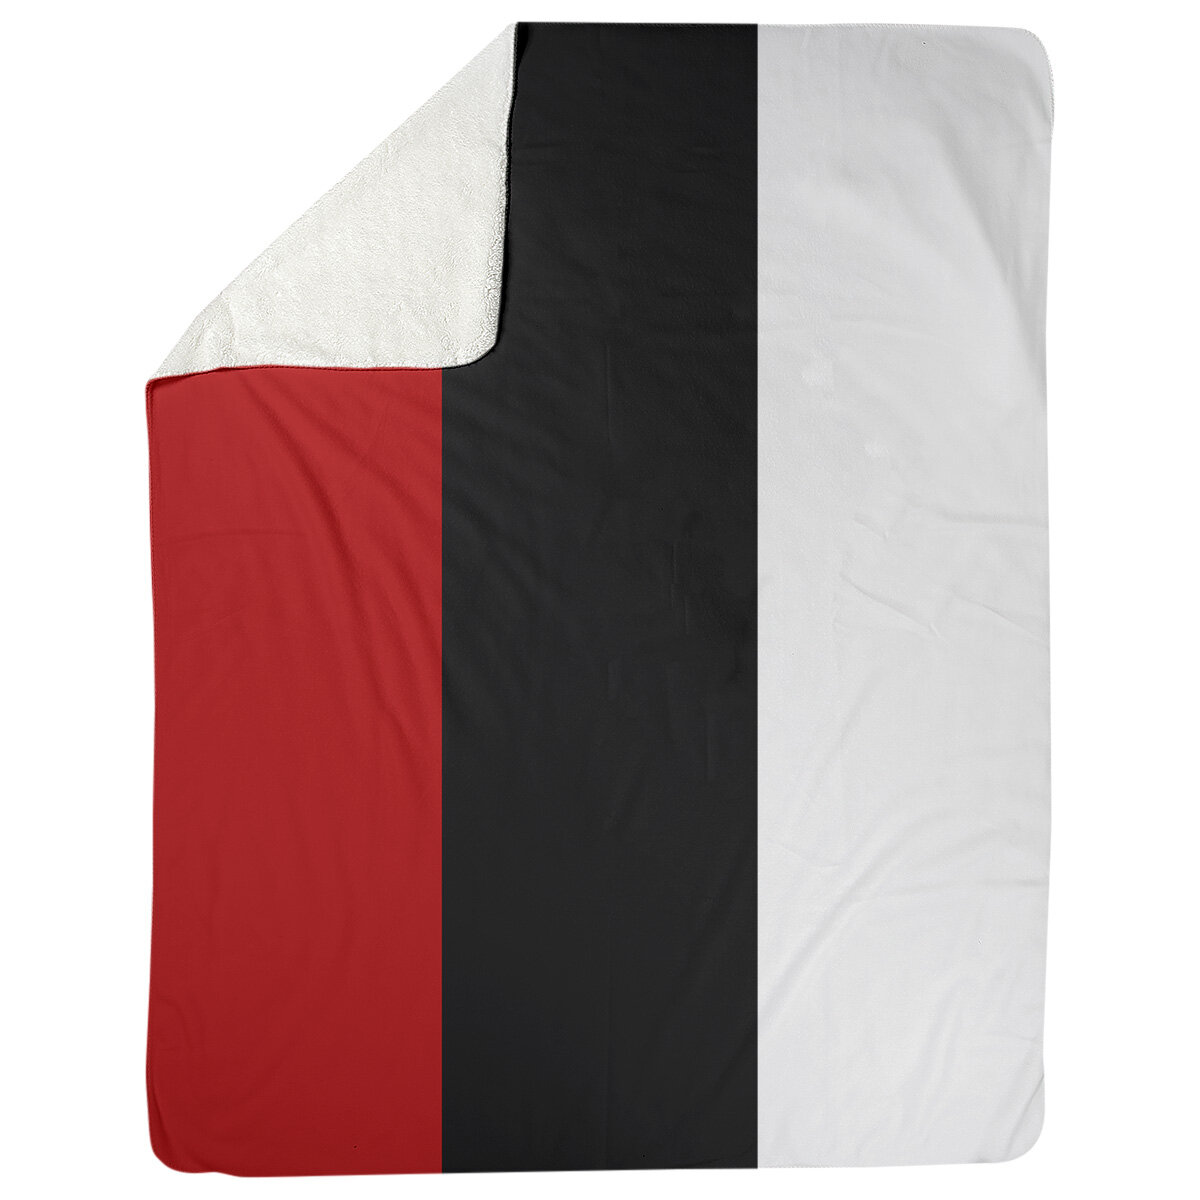 Louisville Fleece Blanket East Urban Home Color: Red/White, Size: 50 W x 60 L